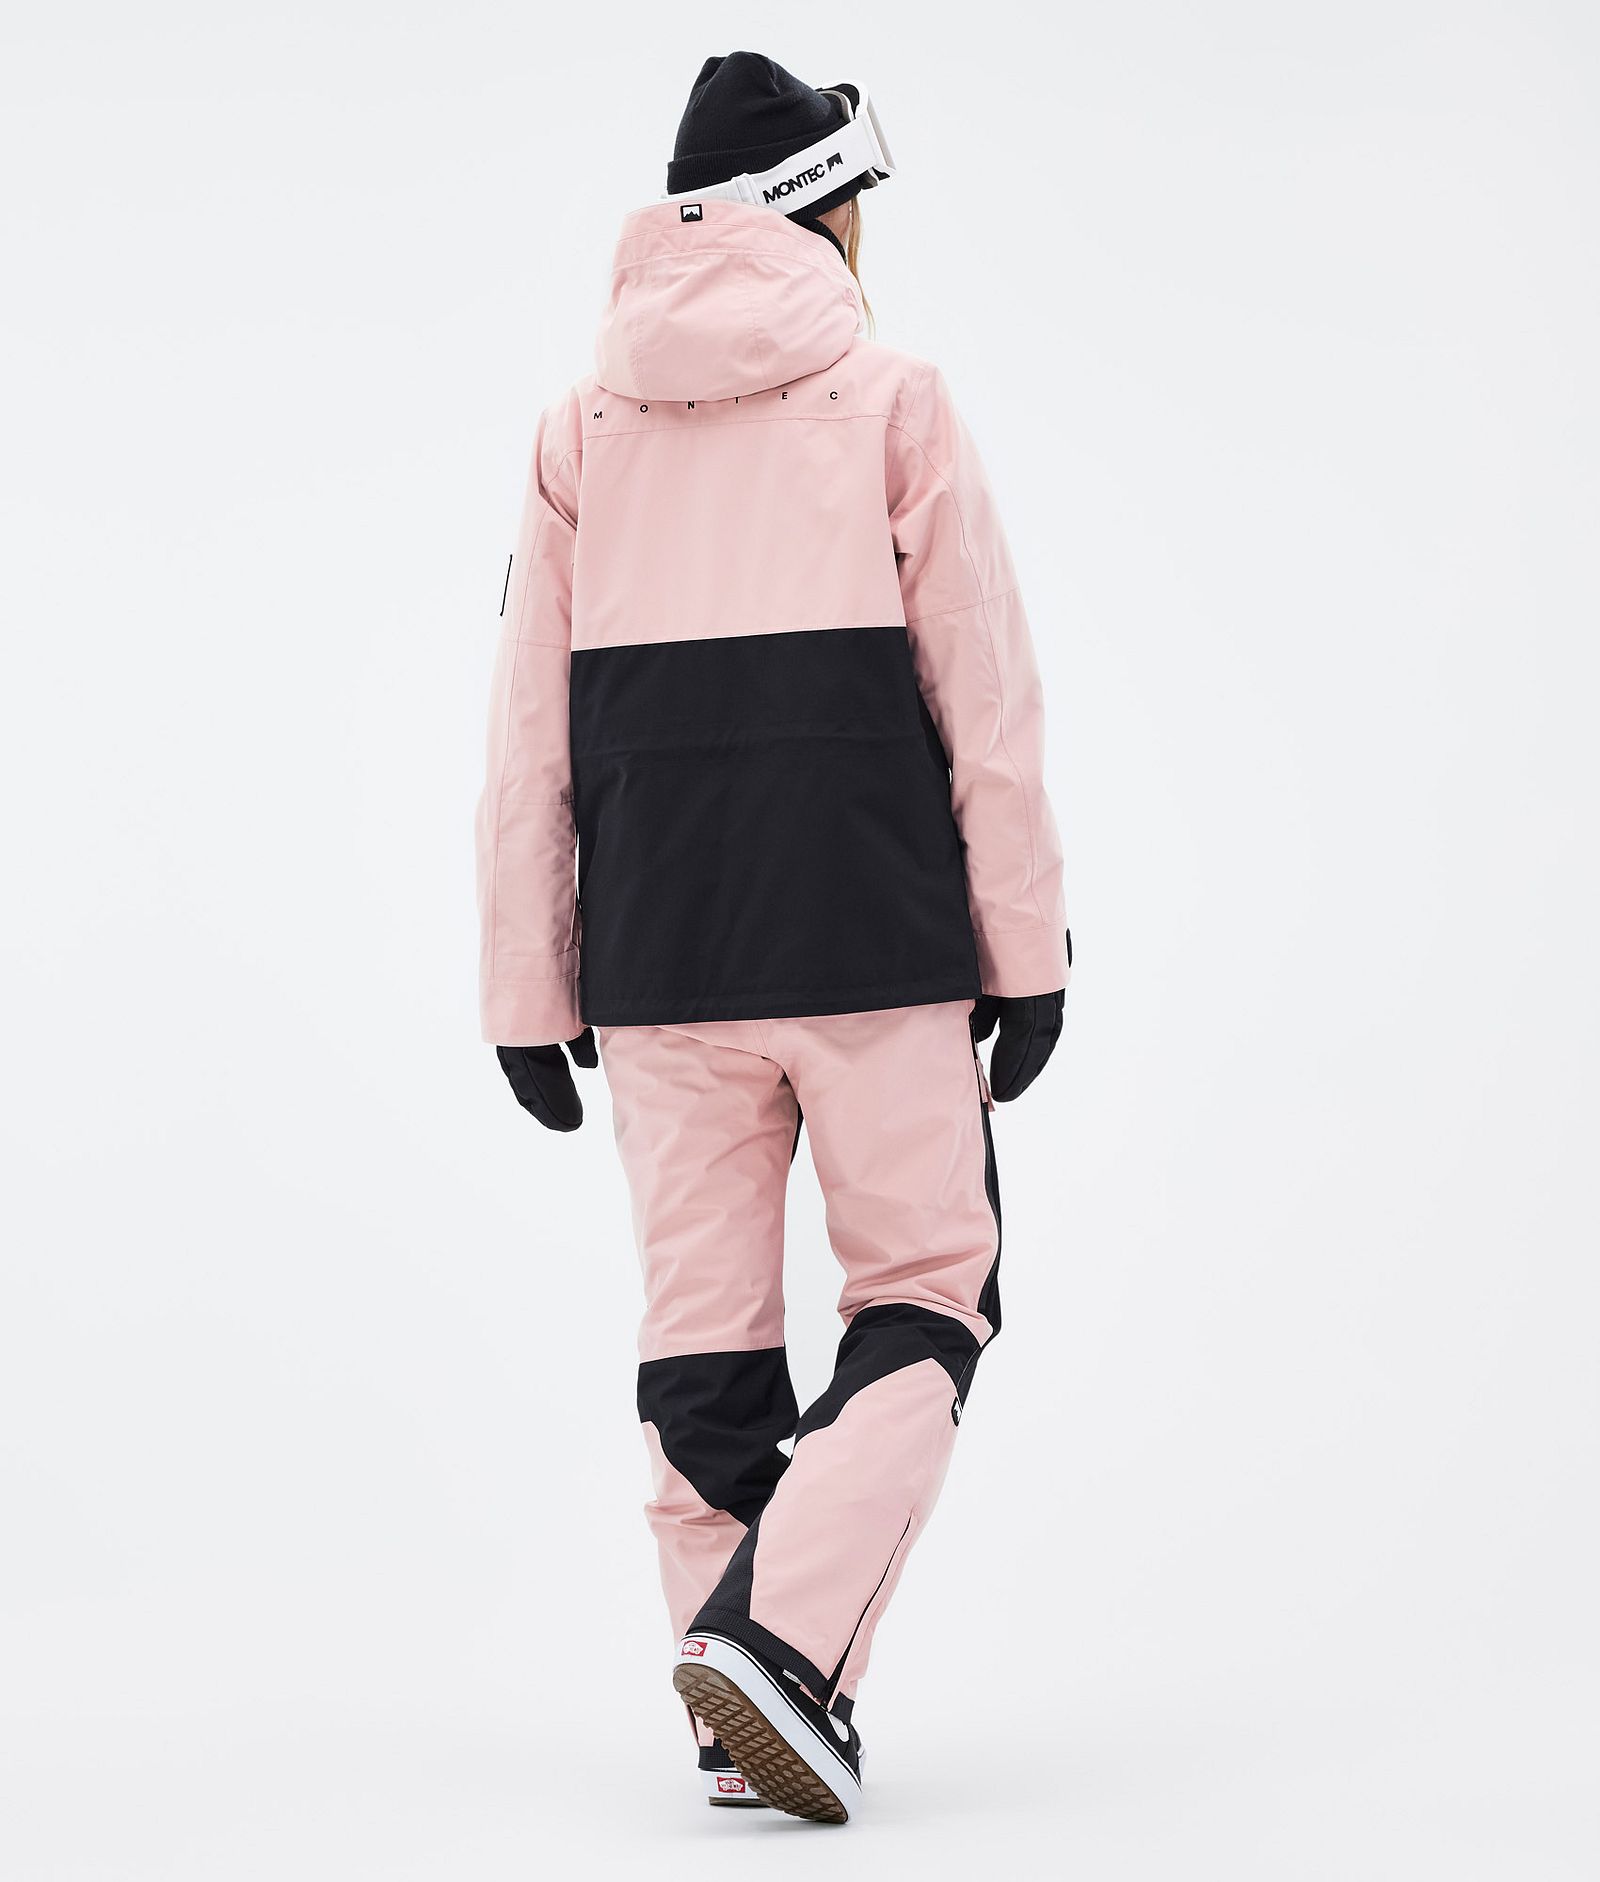 Doom W Snowboard Outfit Dame Soft Pink/Black